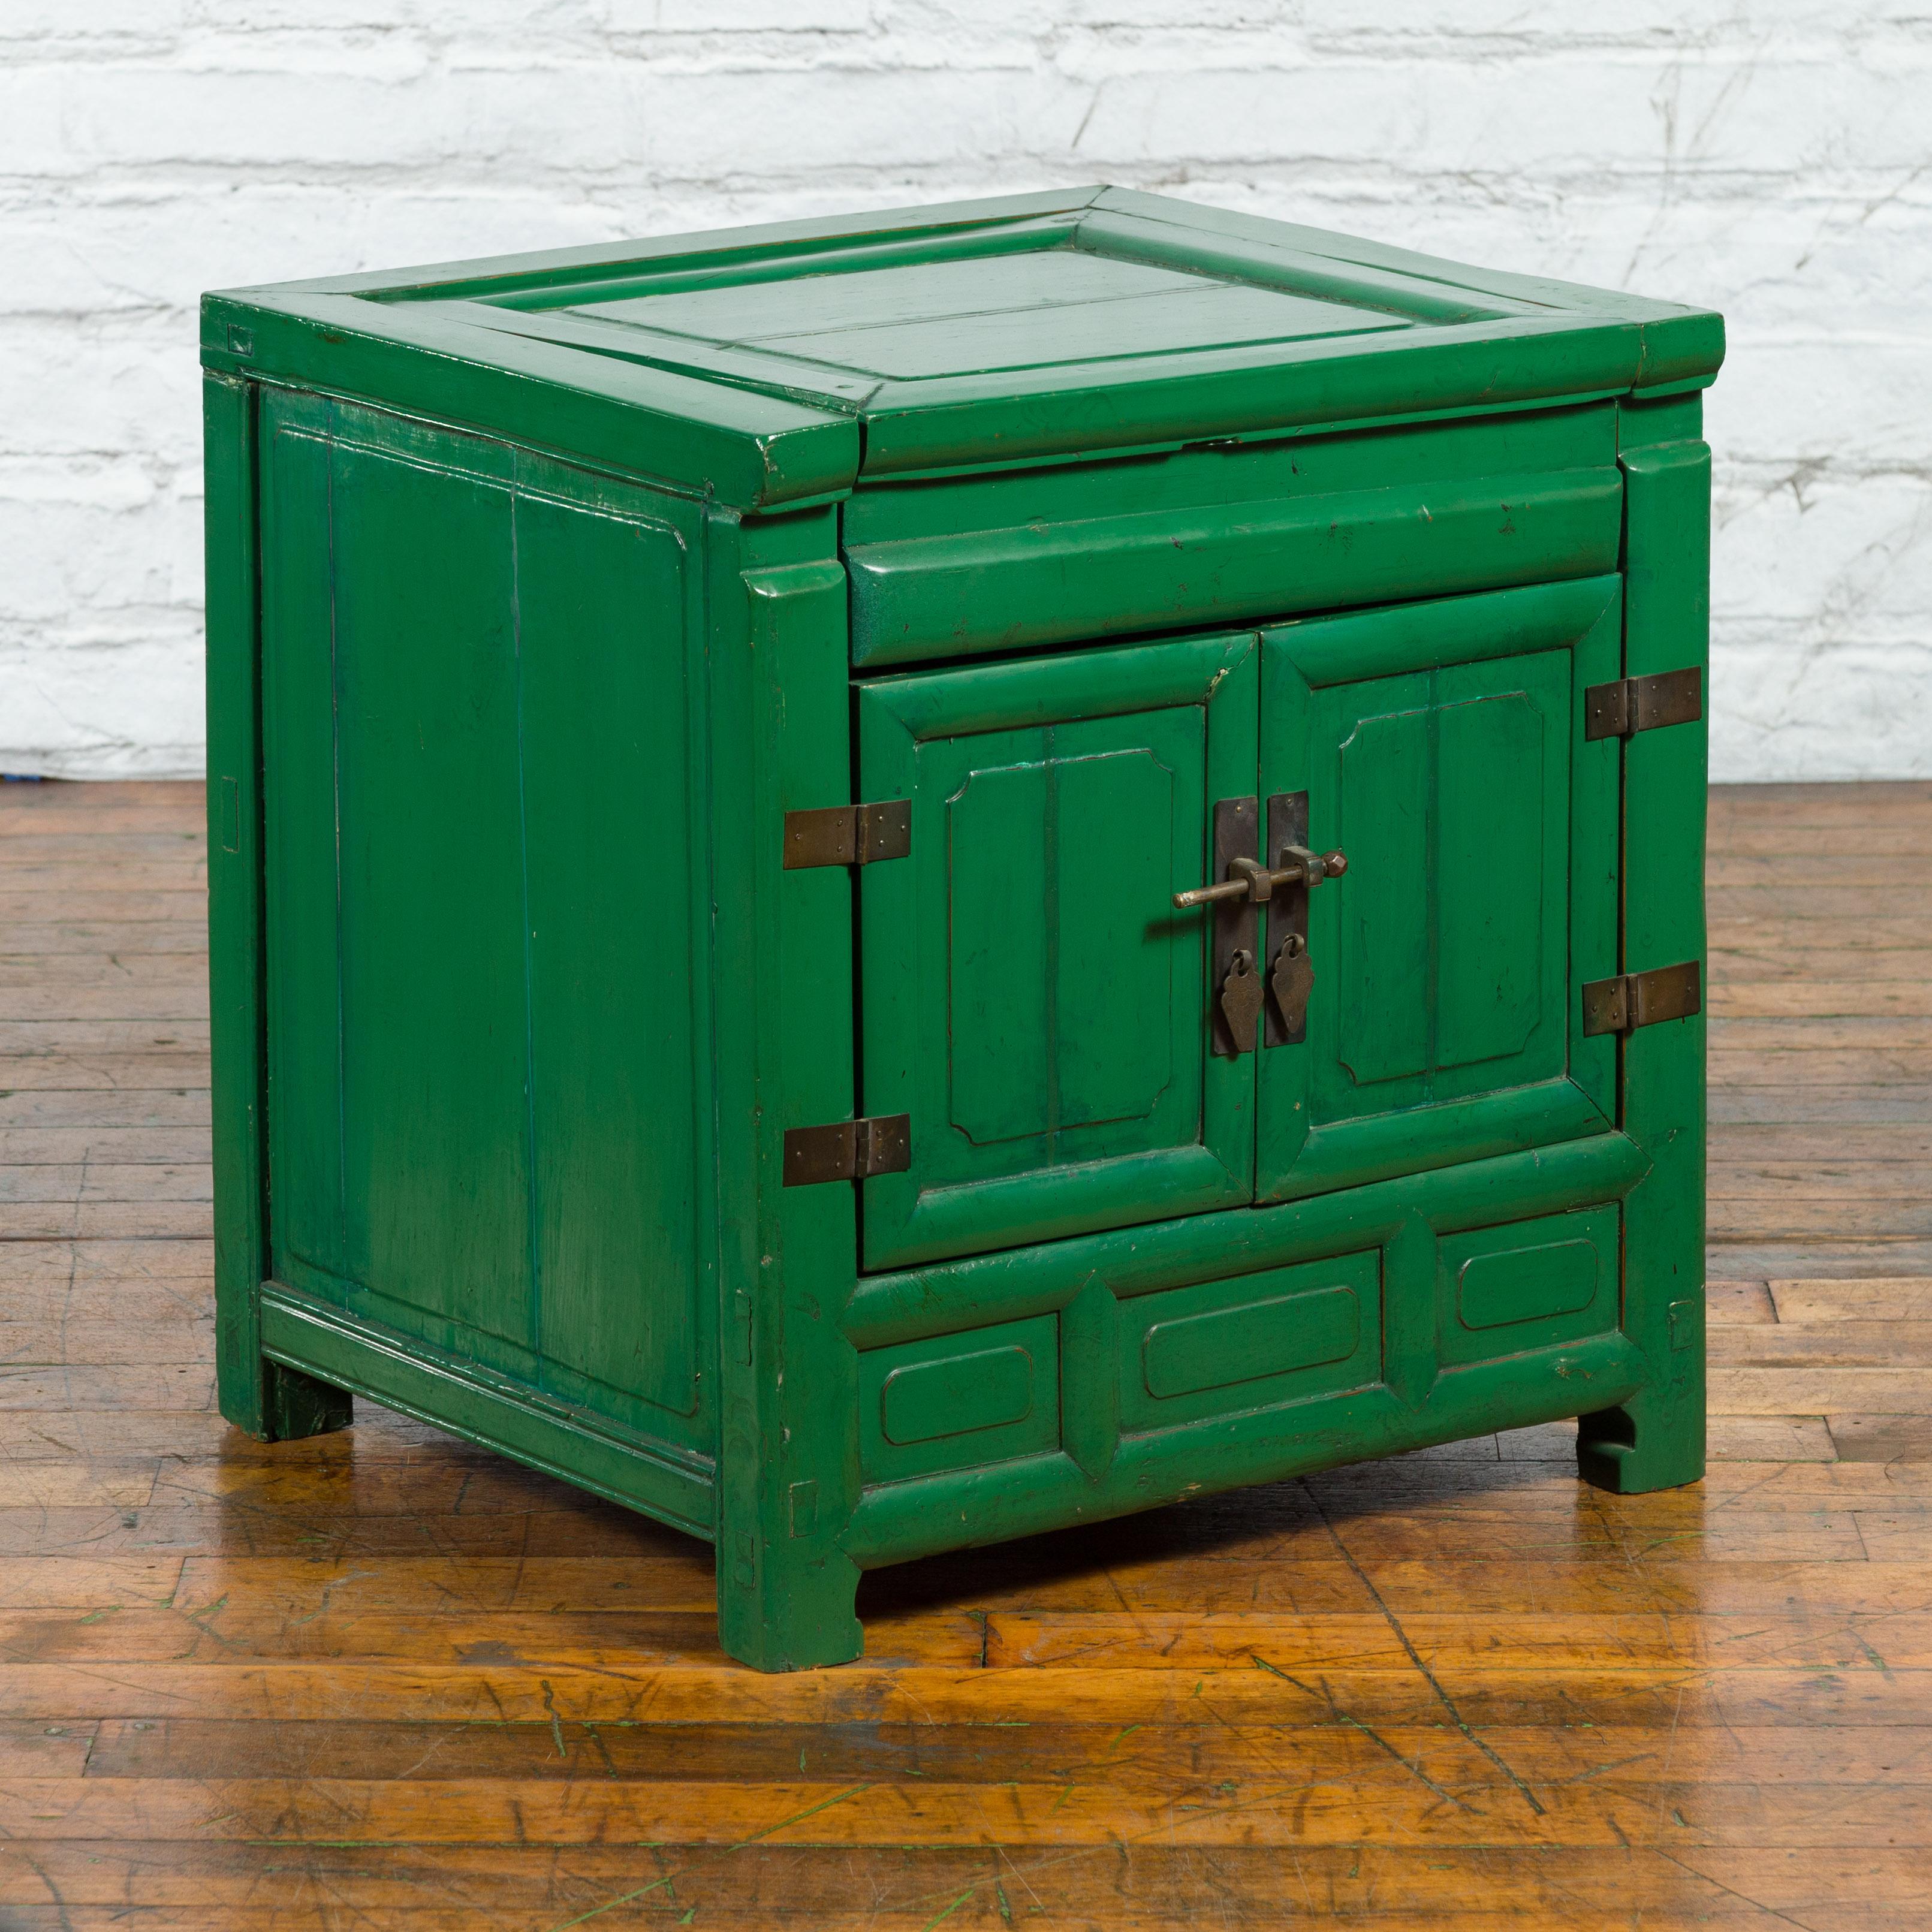 A Chinese Qing Dynasty period green lacquer bedside cabinet from the 19th century, with removable top and brass hardware. Created in China during the 19th century, this bedside cabinet attracts our attention with its green lacquer complimenting the